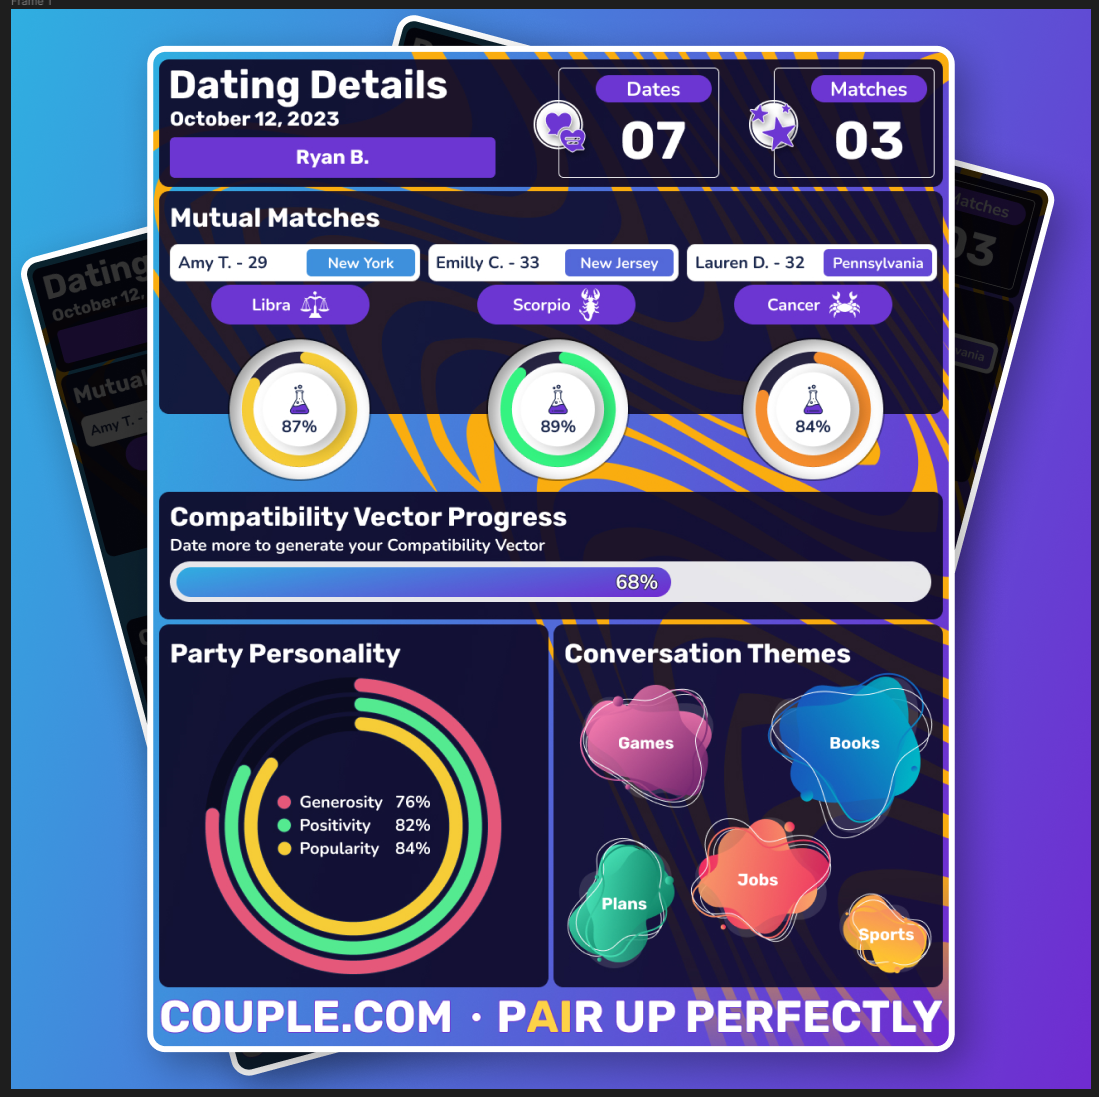 CLOSE-UP ON COUPLE: THE DATING DETAILS CARD